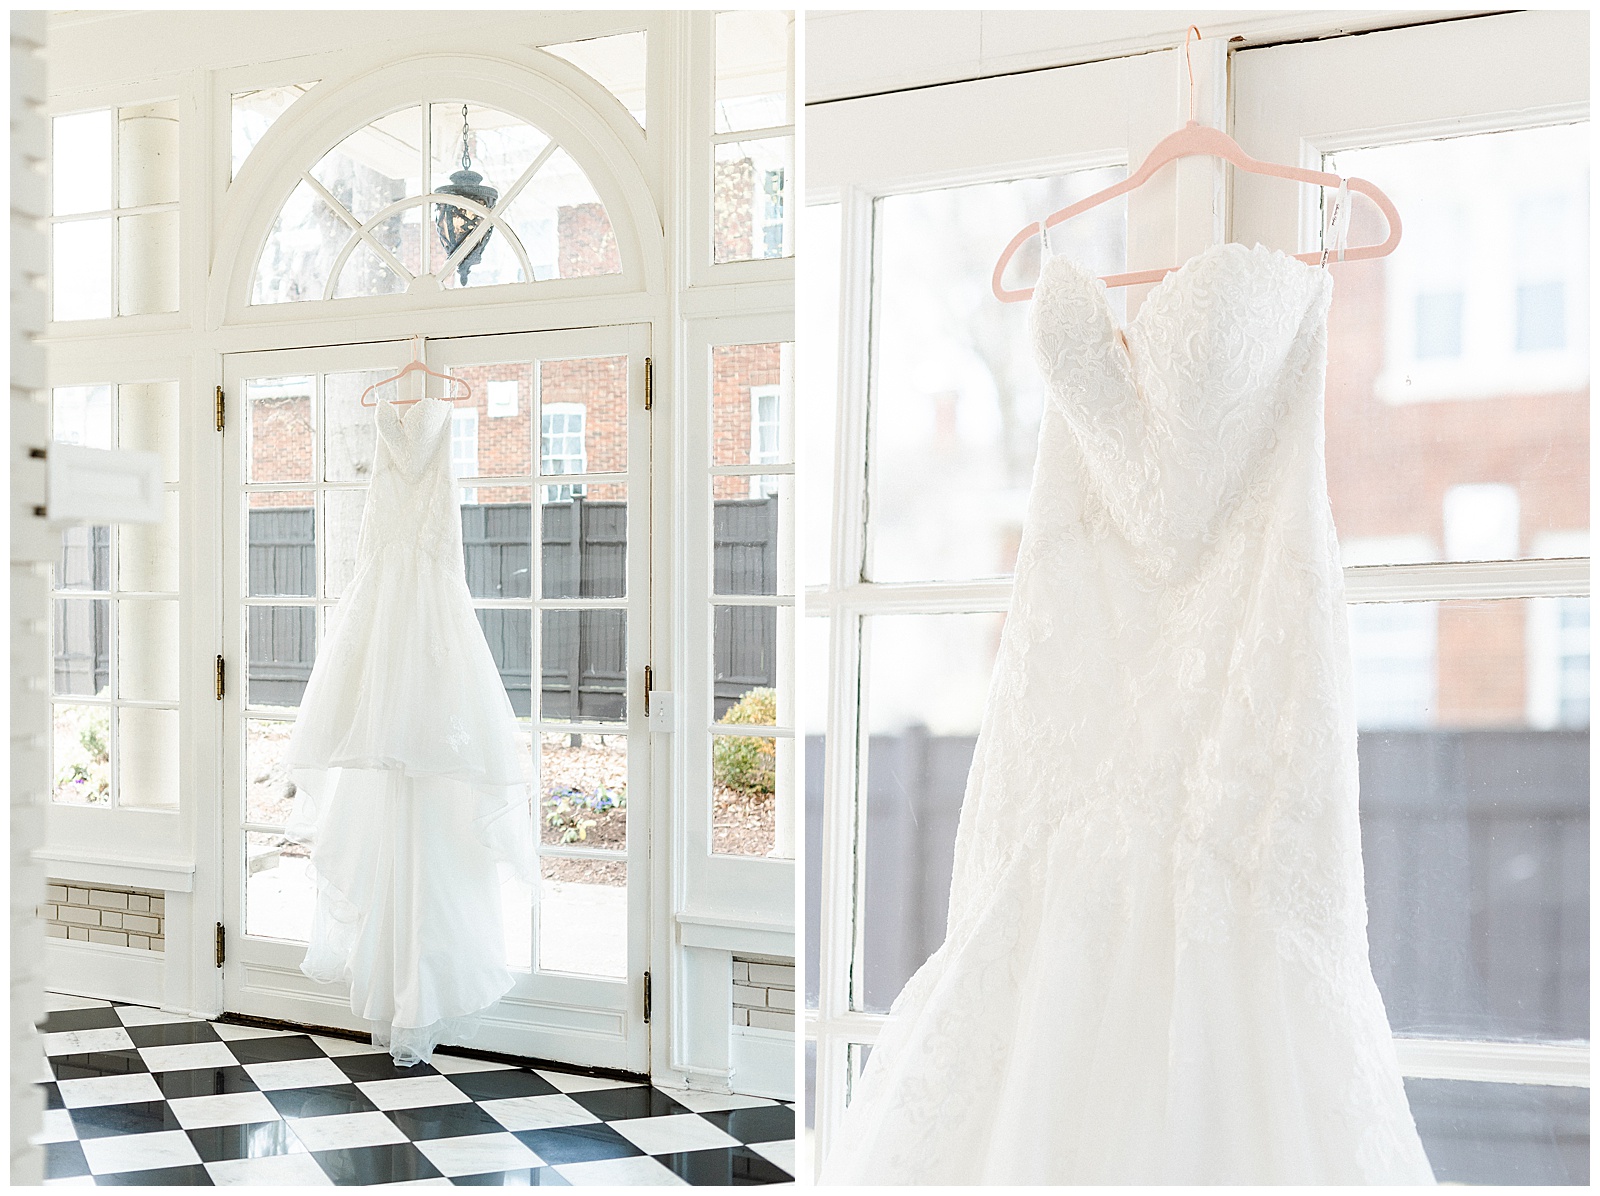 Lace Wedding Dress from Light and Airy Outdoor Wedding at Separk Mansion in Gastonia, NC | Kevyn Dixon Photography